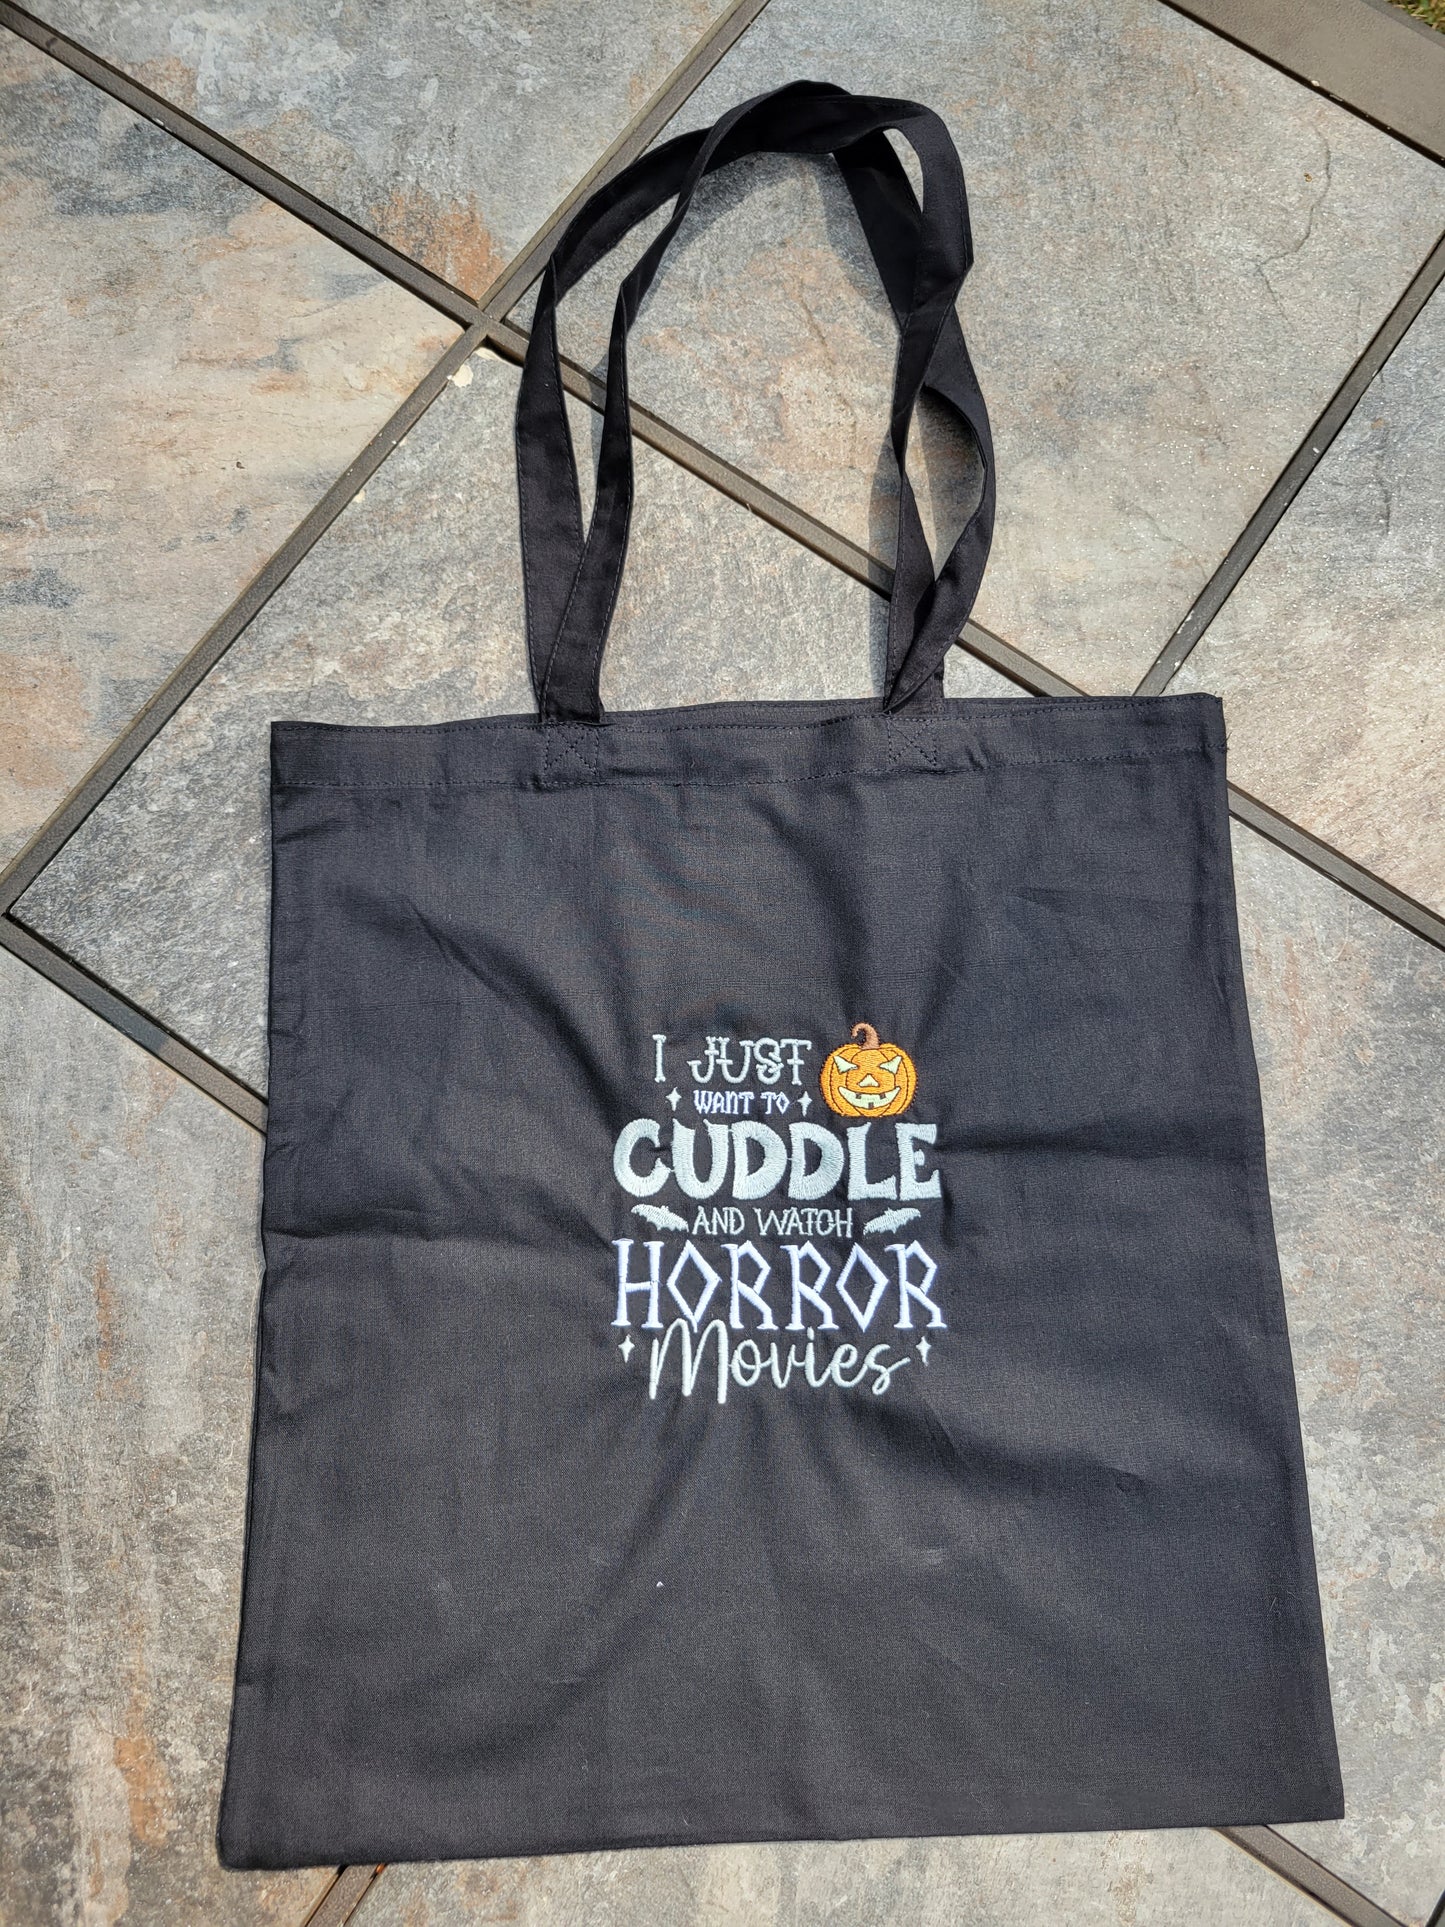 "I just want to cuddle and watch horror movies" Embroidered Tote Bag - GLOW IN THE DARK!